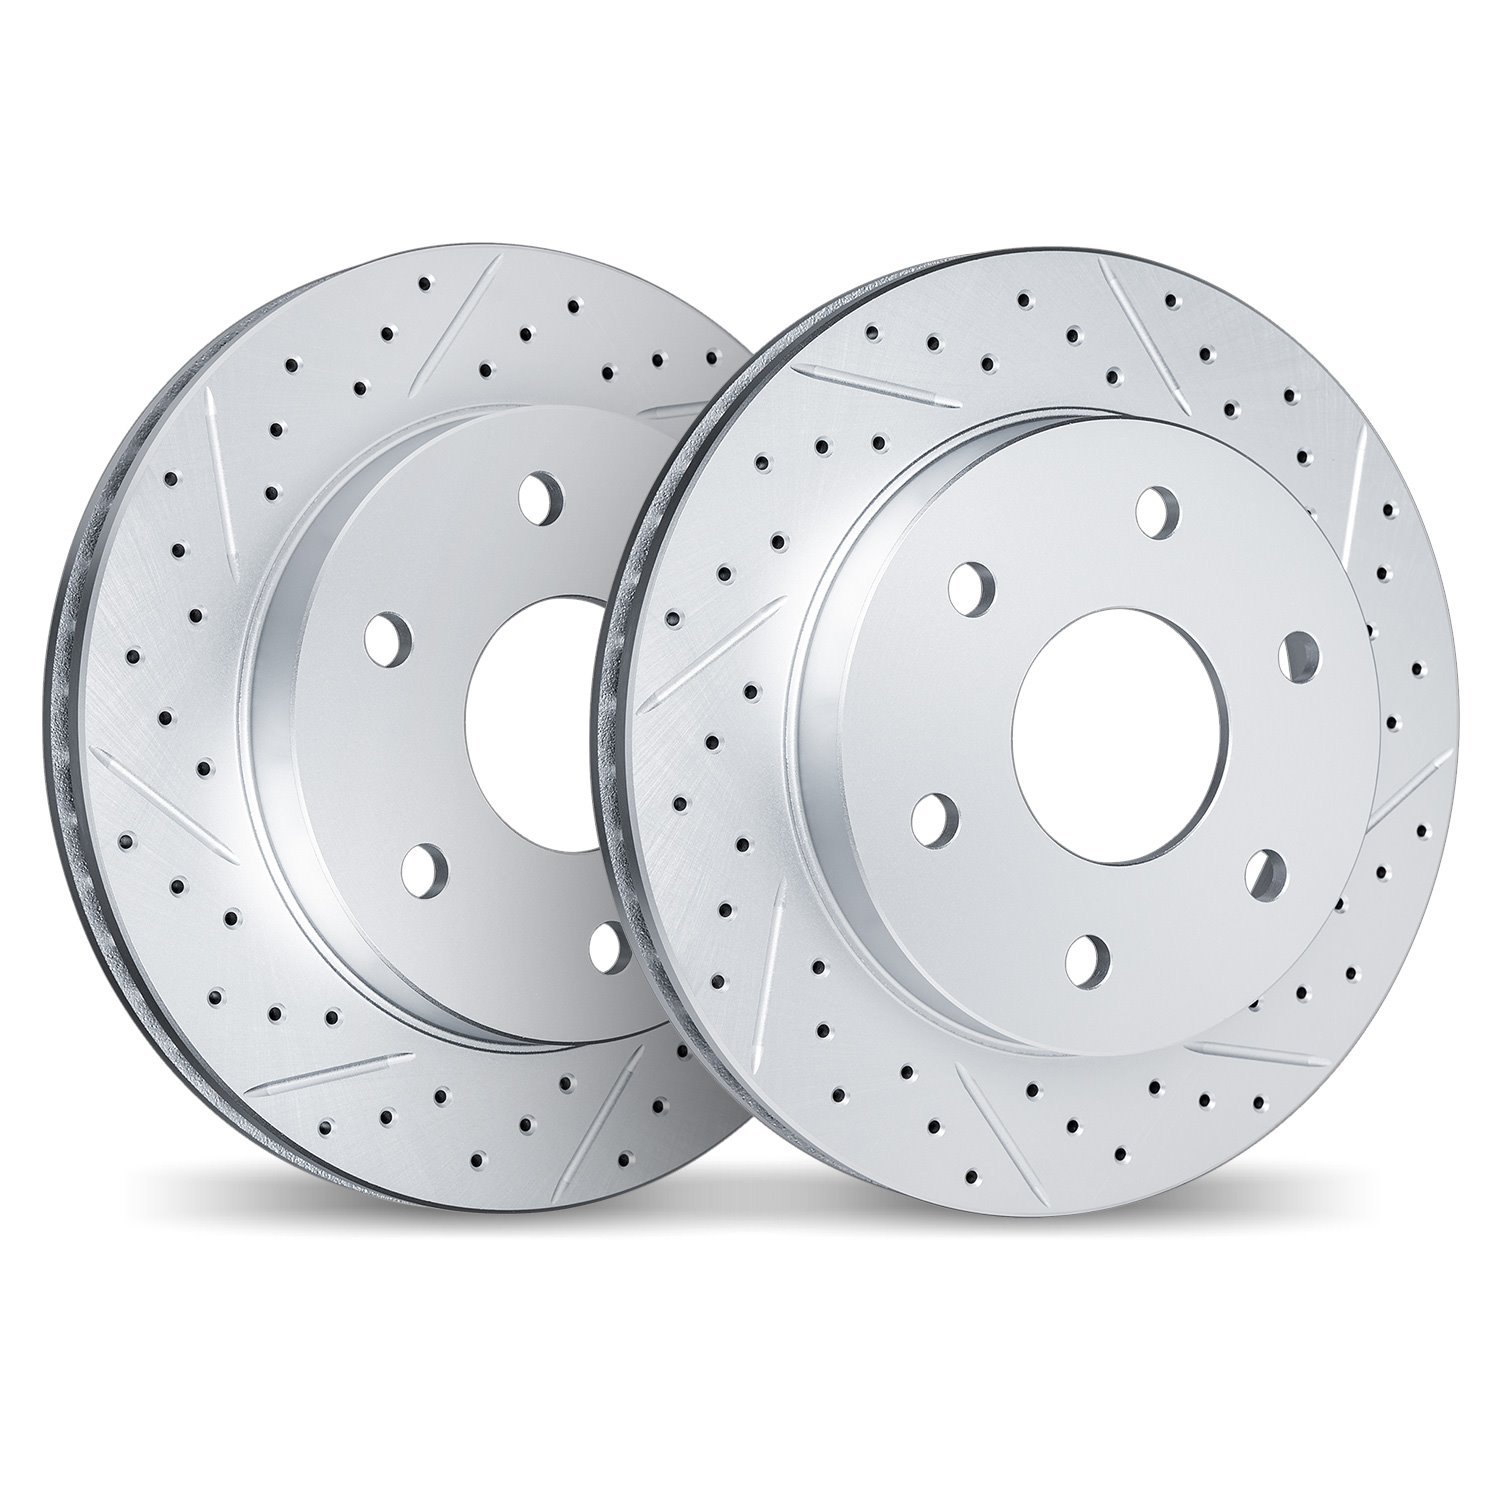 2002-46019 Geoperformance Drilled/Slotted Brake Rotors, 2010-2016 GM, Position: Front